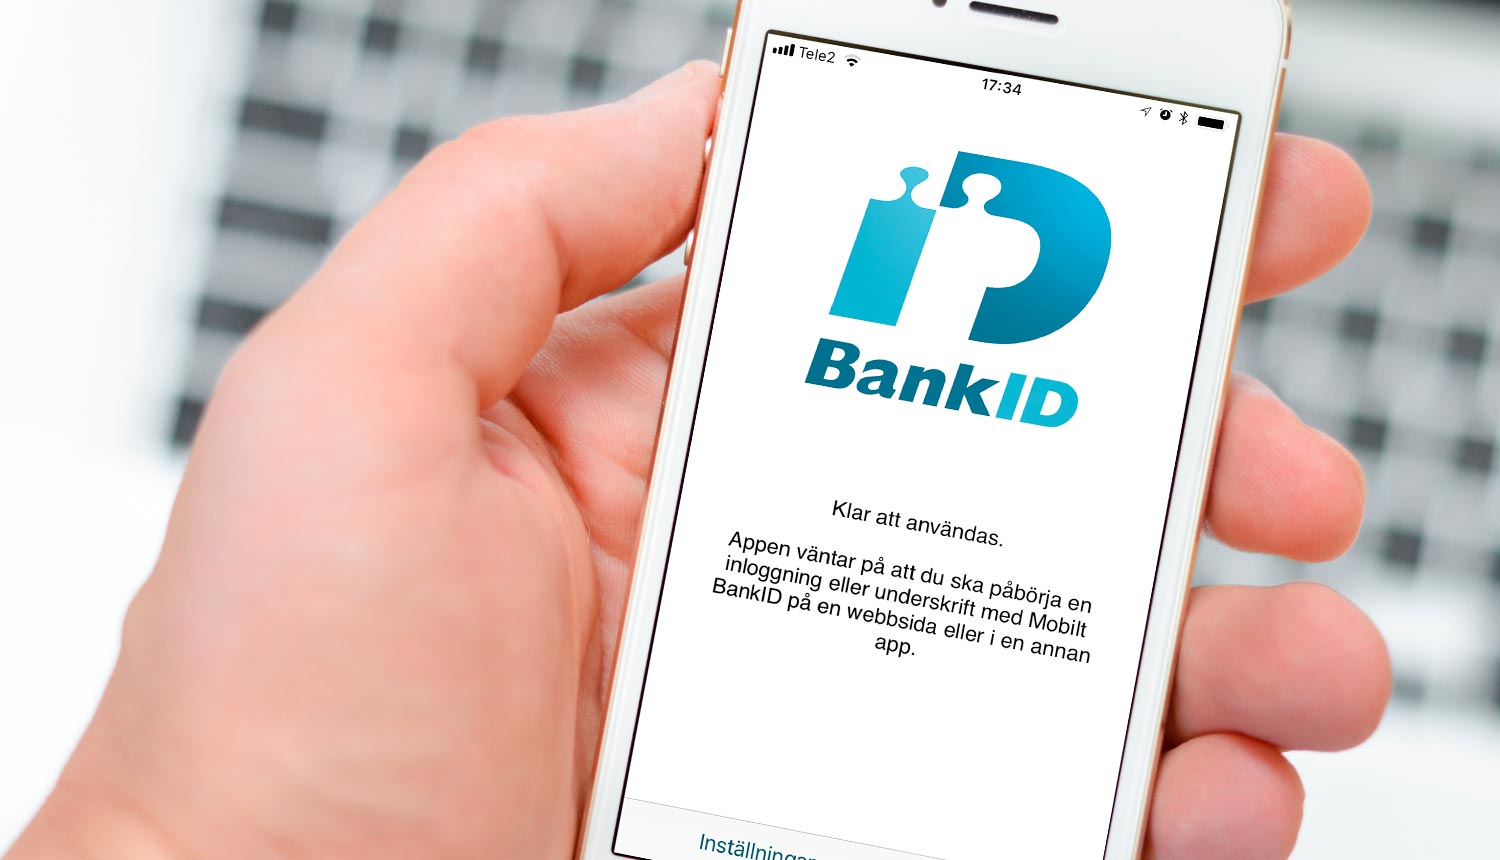 Bank-ID på Iphone 5s